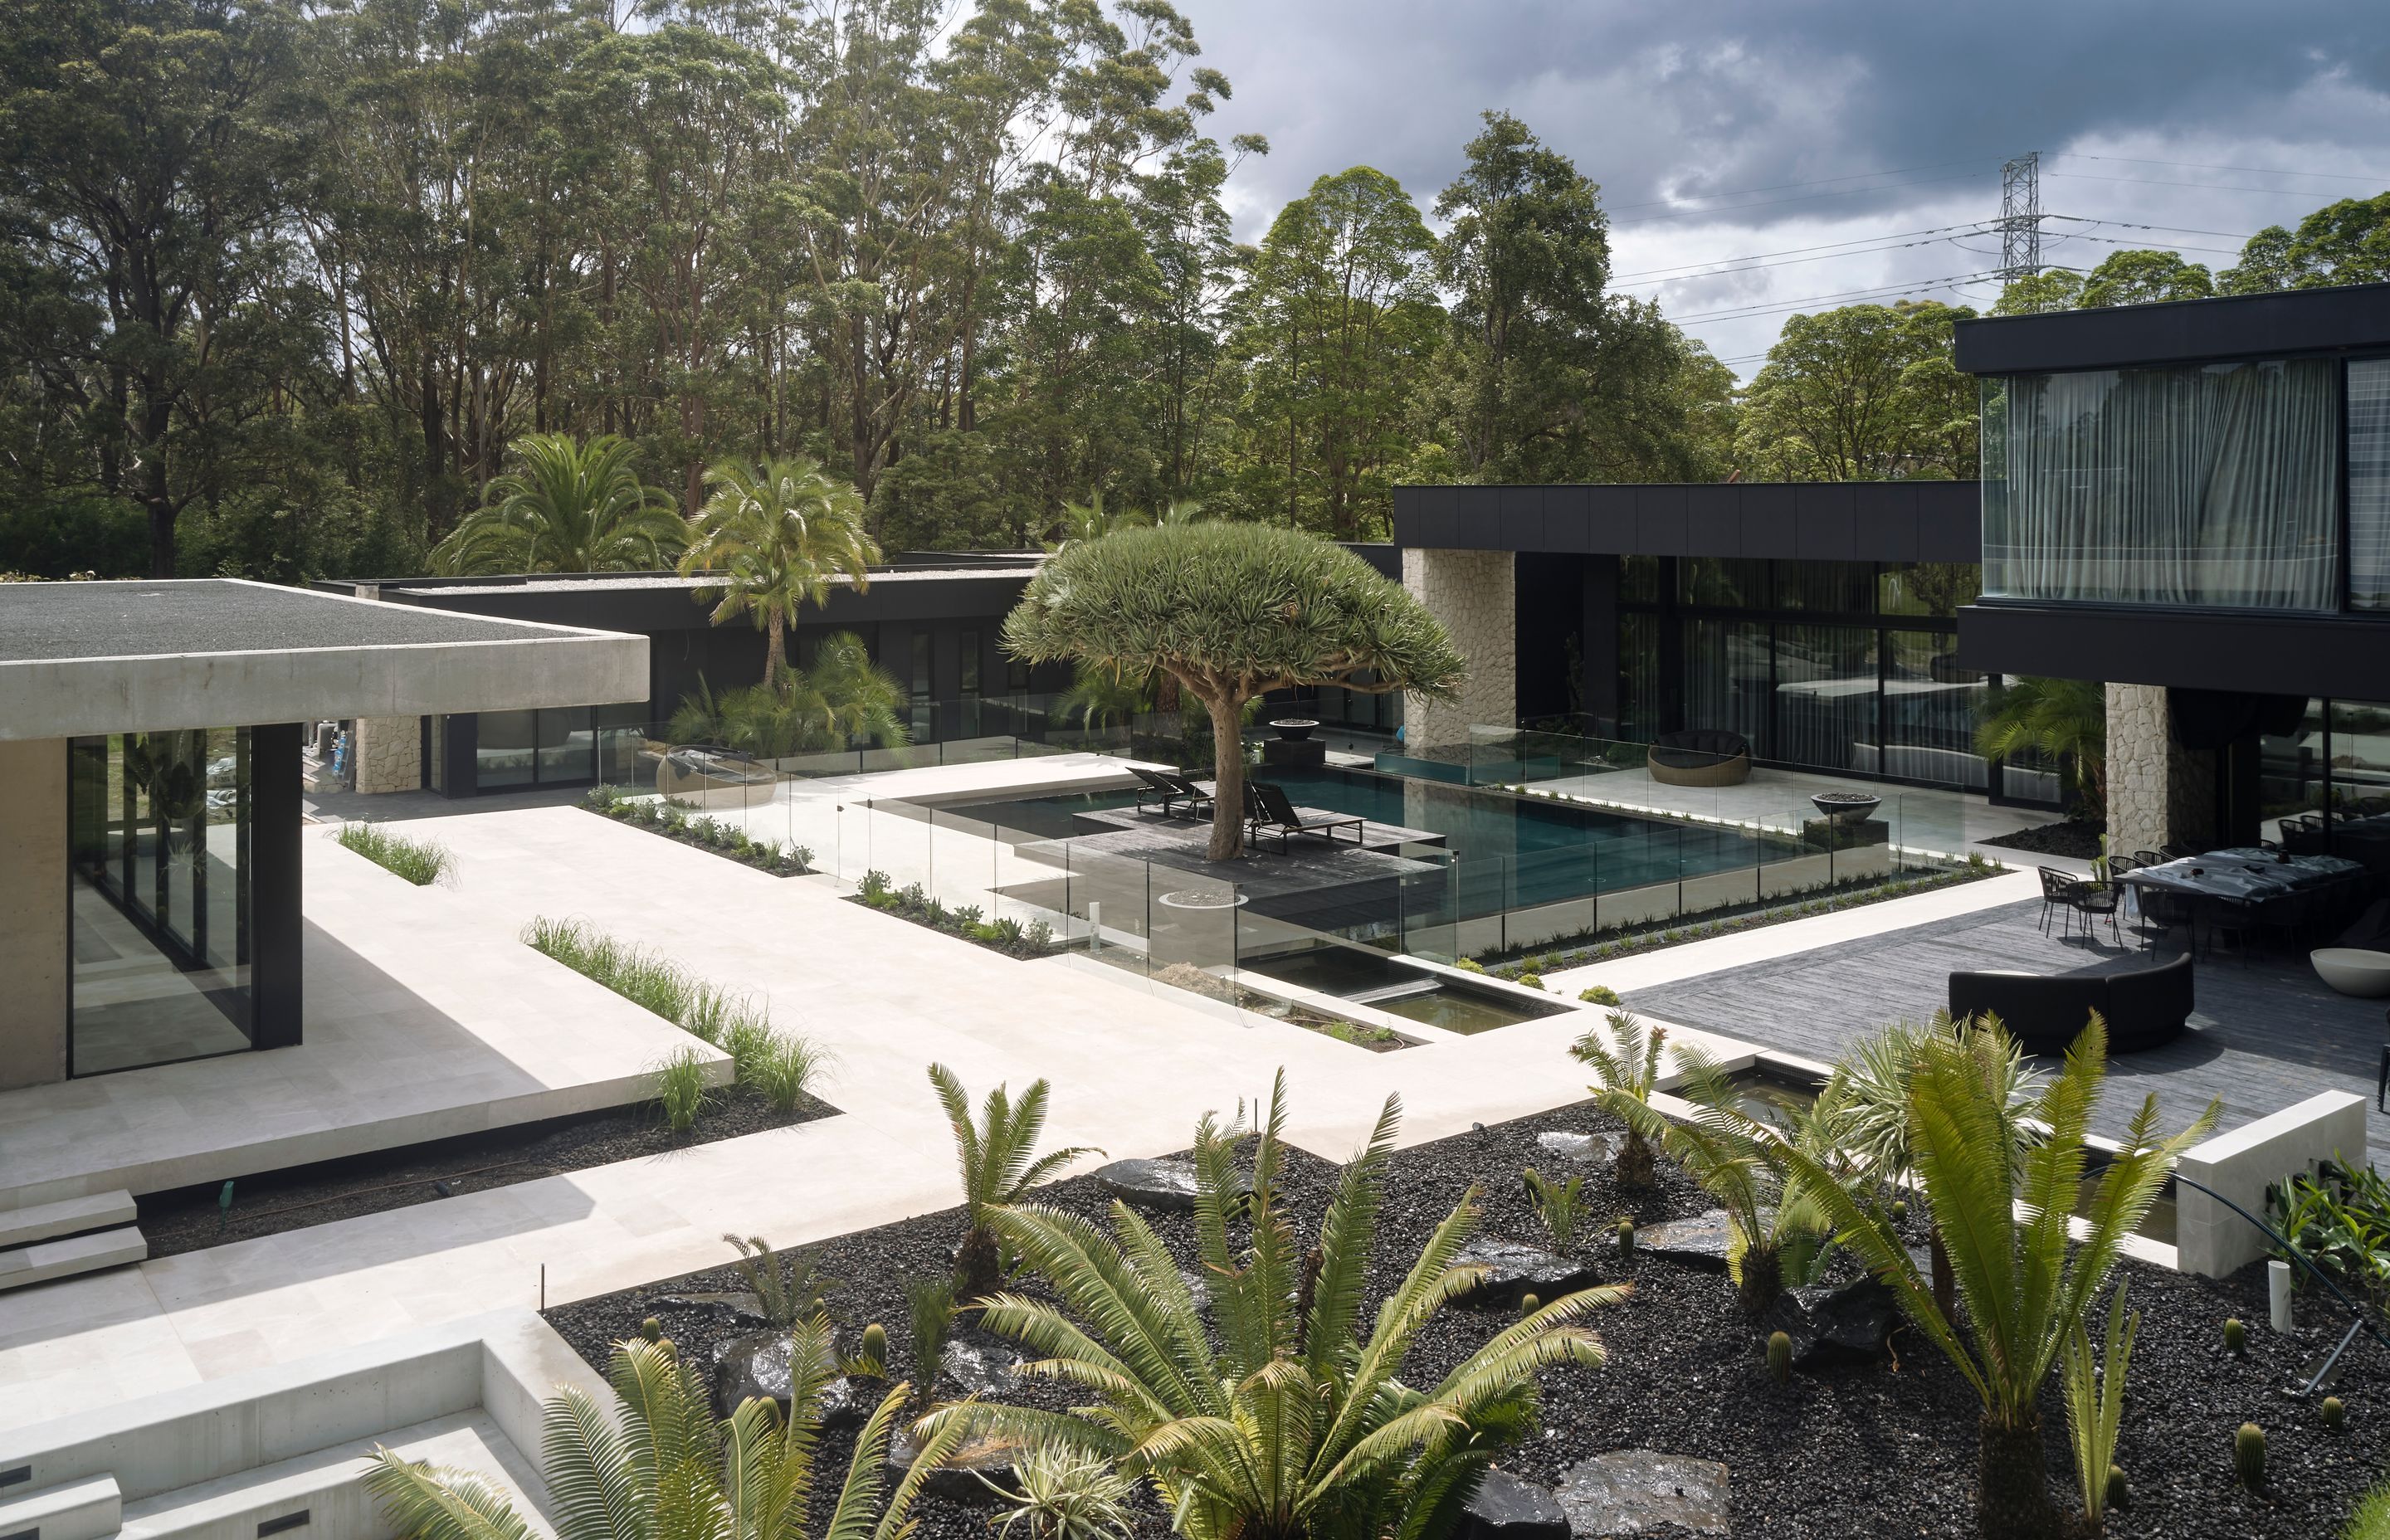 The frameless glass allows an absolutely seamless experience of the pool and landscaping, with no visual interruptions.